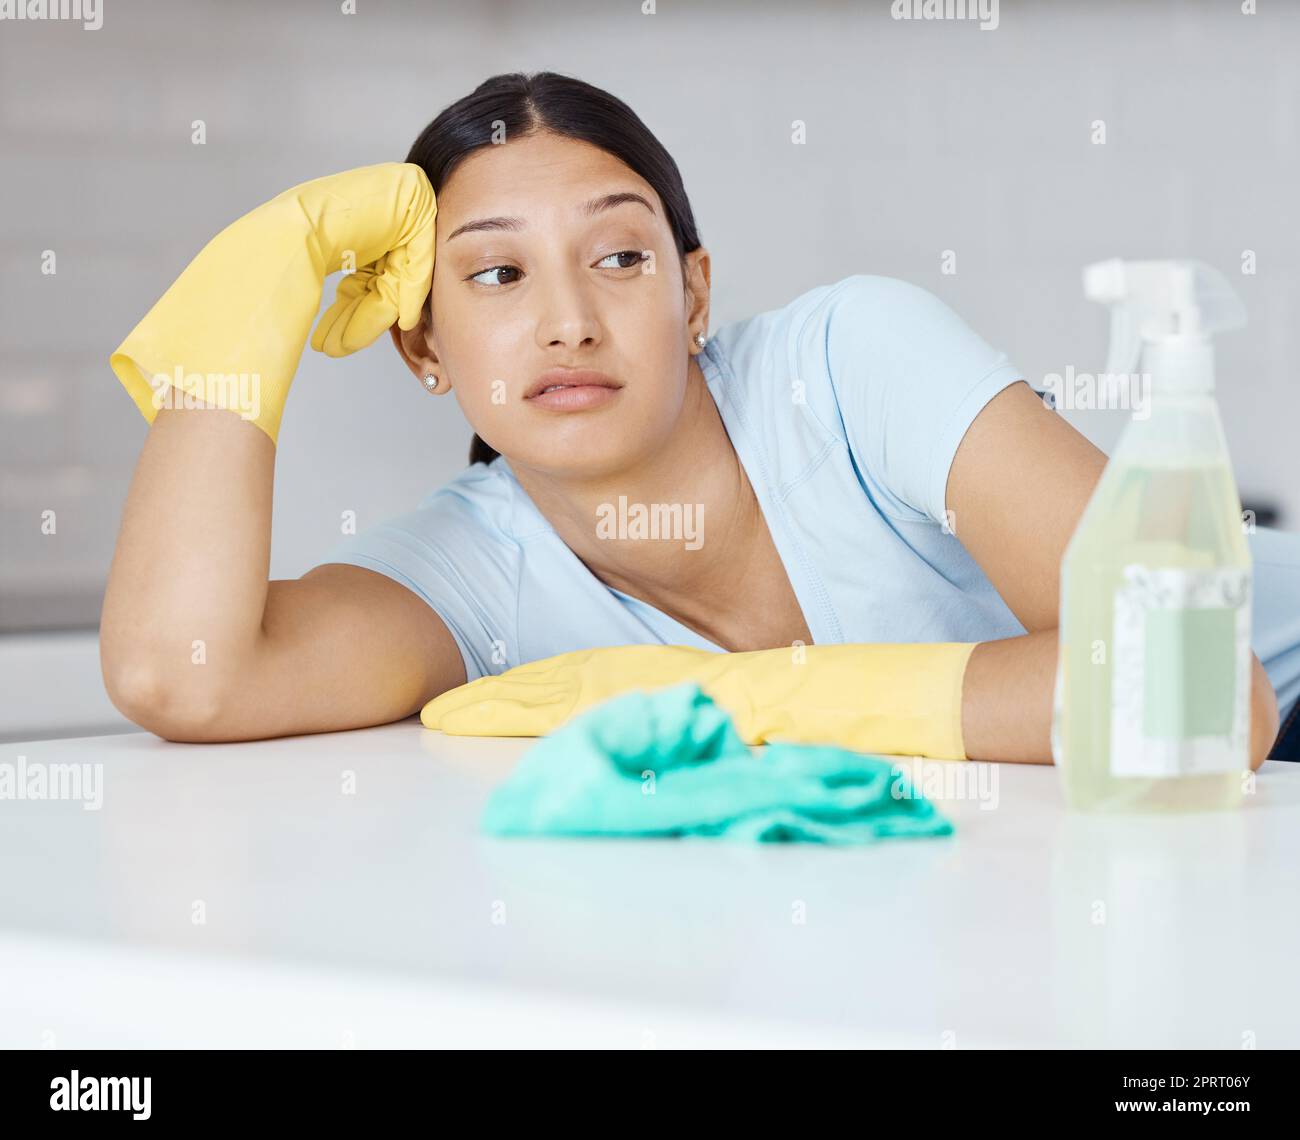 https://c8.alamy.com/comp/2PRT06Y/cleaning-covid-and-hygiene-with-a-bored-woman-cleaner-looking-at-a-spray-bottle-or-sanitizer-with-a-negative-expression-chores-clean-and-sanitizing-with-a-young-female-unhappy-about-housework-2PRT06Y.jpg